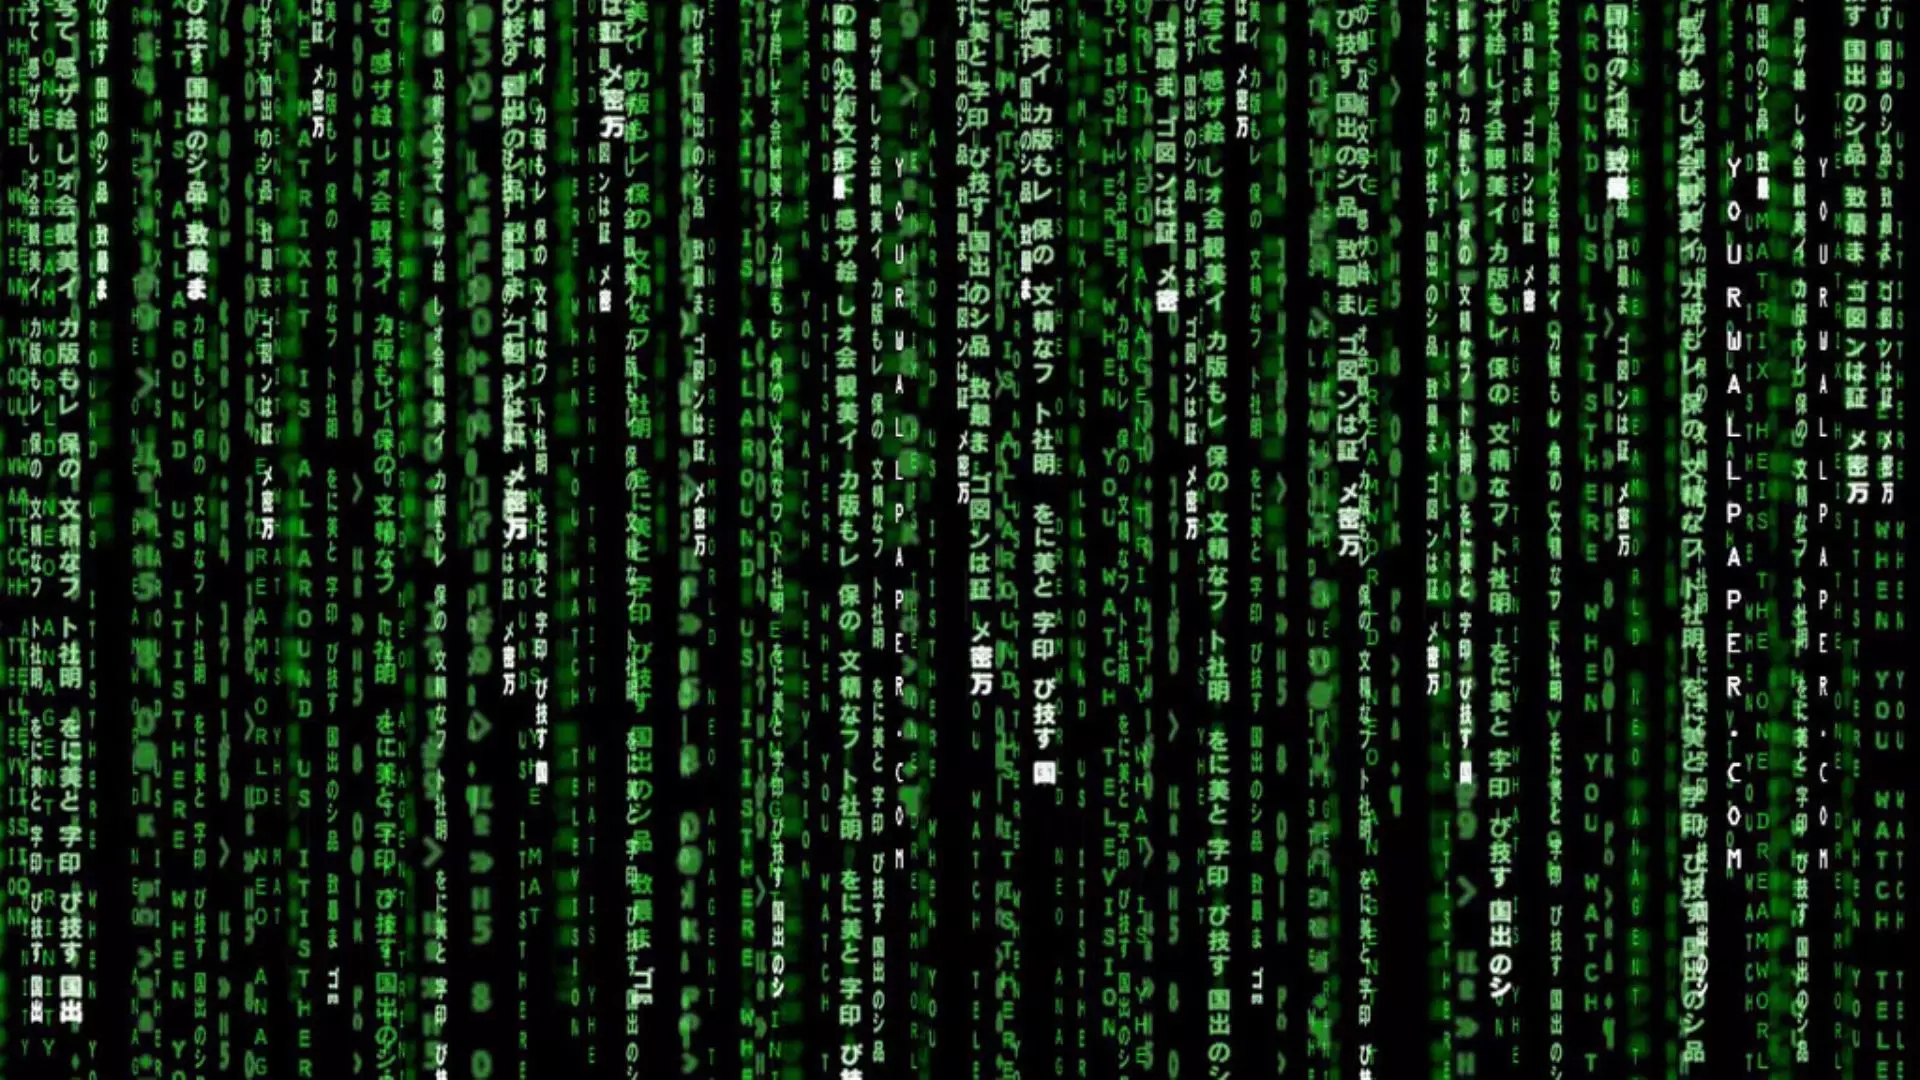 The Green Code In 'The Matrix's Opening Sequence Is Actually A Sushi Recipe